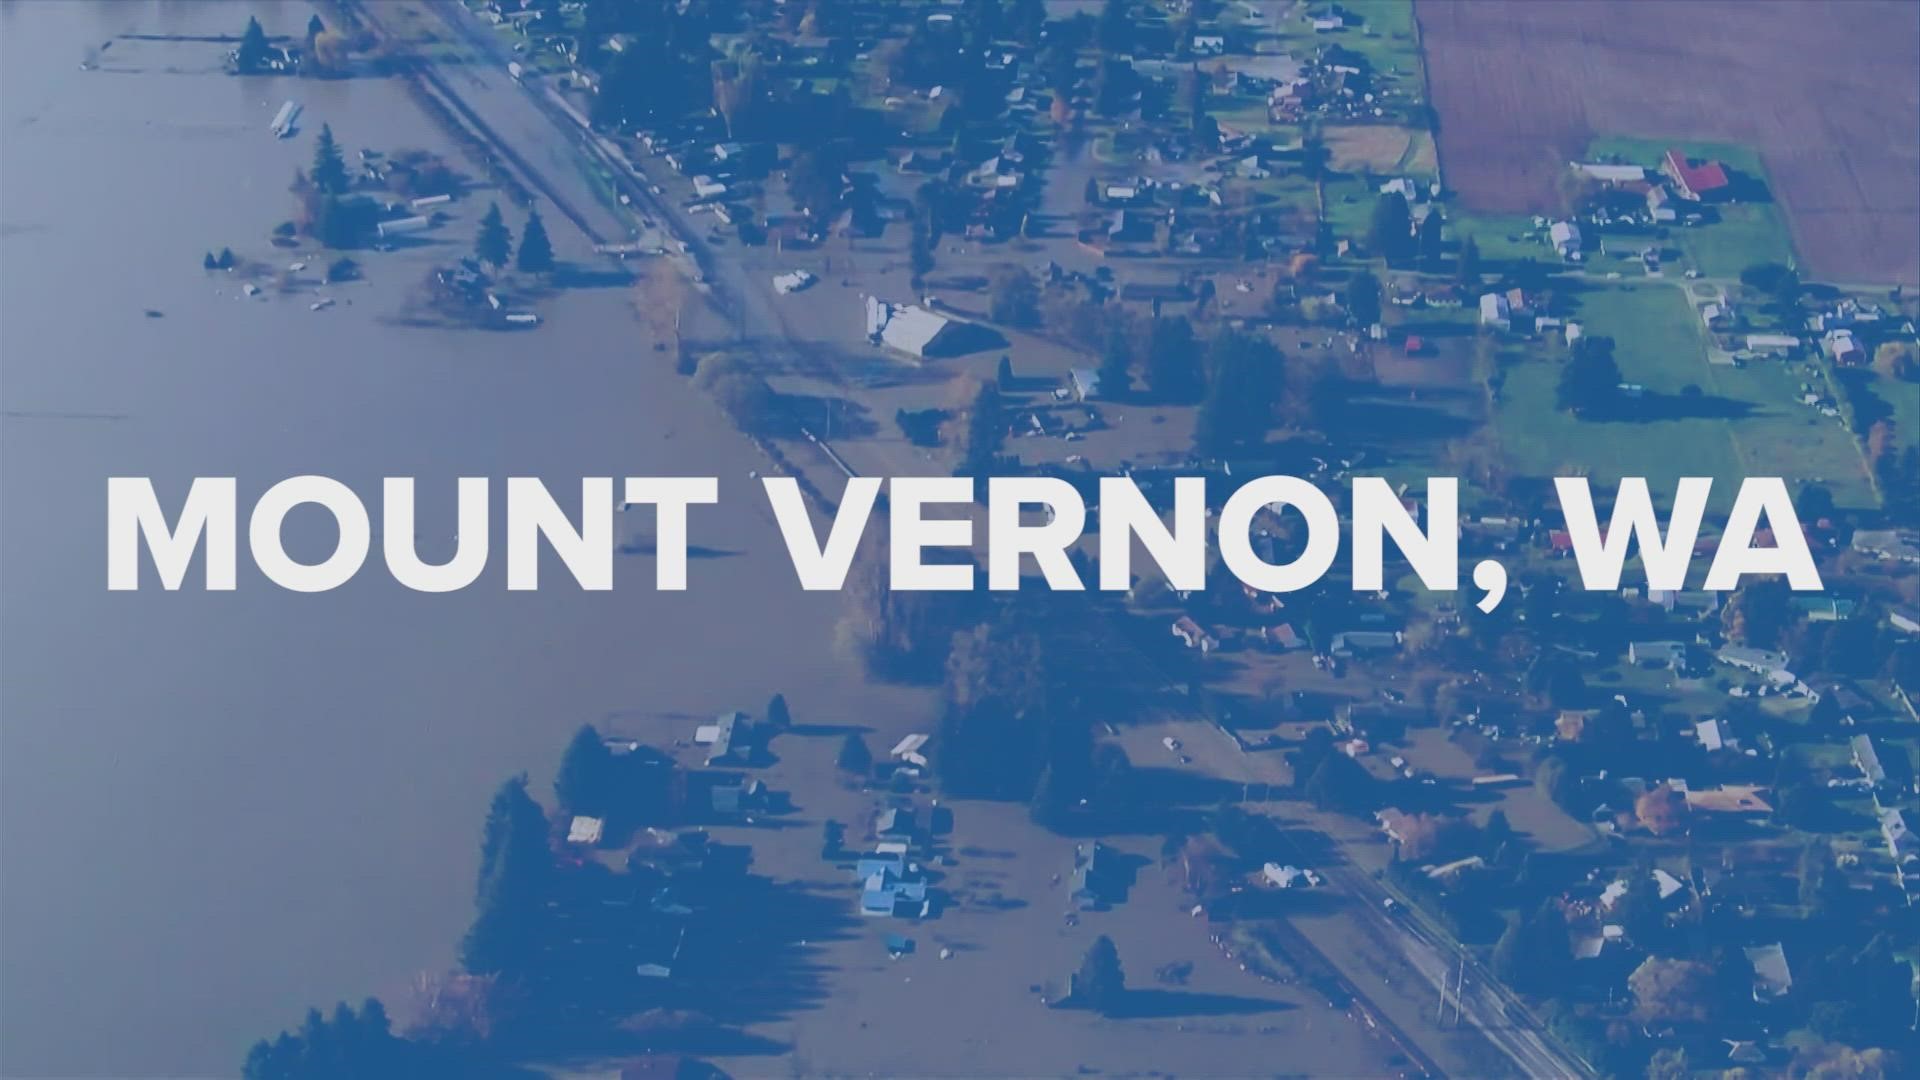 Massive flooding in Mount Vernon, Washington caused a civil emergency